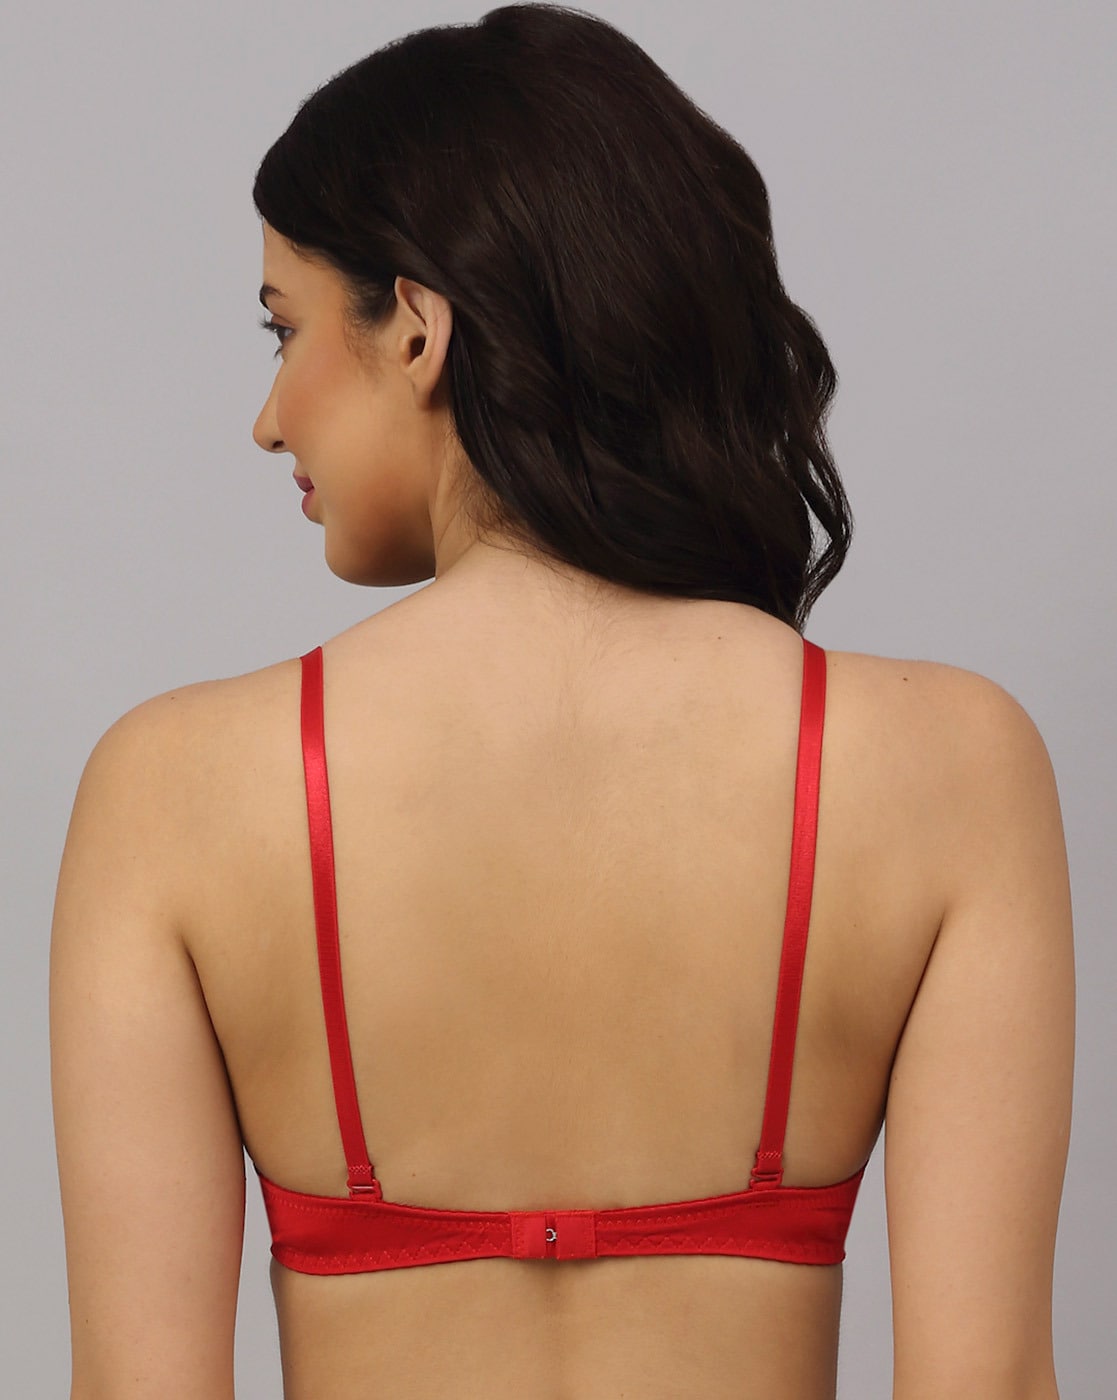 Shaikhhands Lycra Cotton Cotton Padded Pushup Fancy T-shirt Bra with  Net-Carrot Red, for Party Wear at Rs 85/piece in Noida